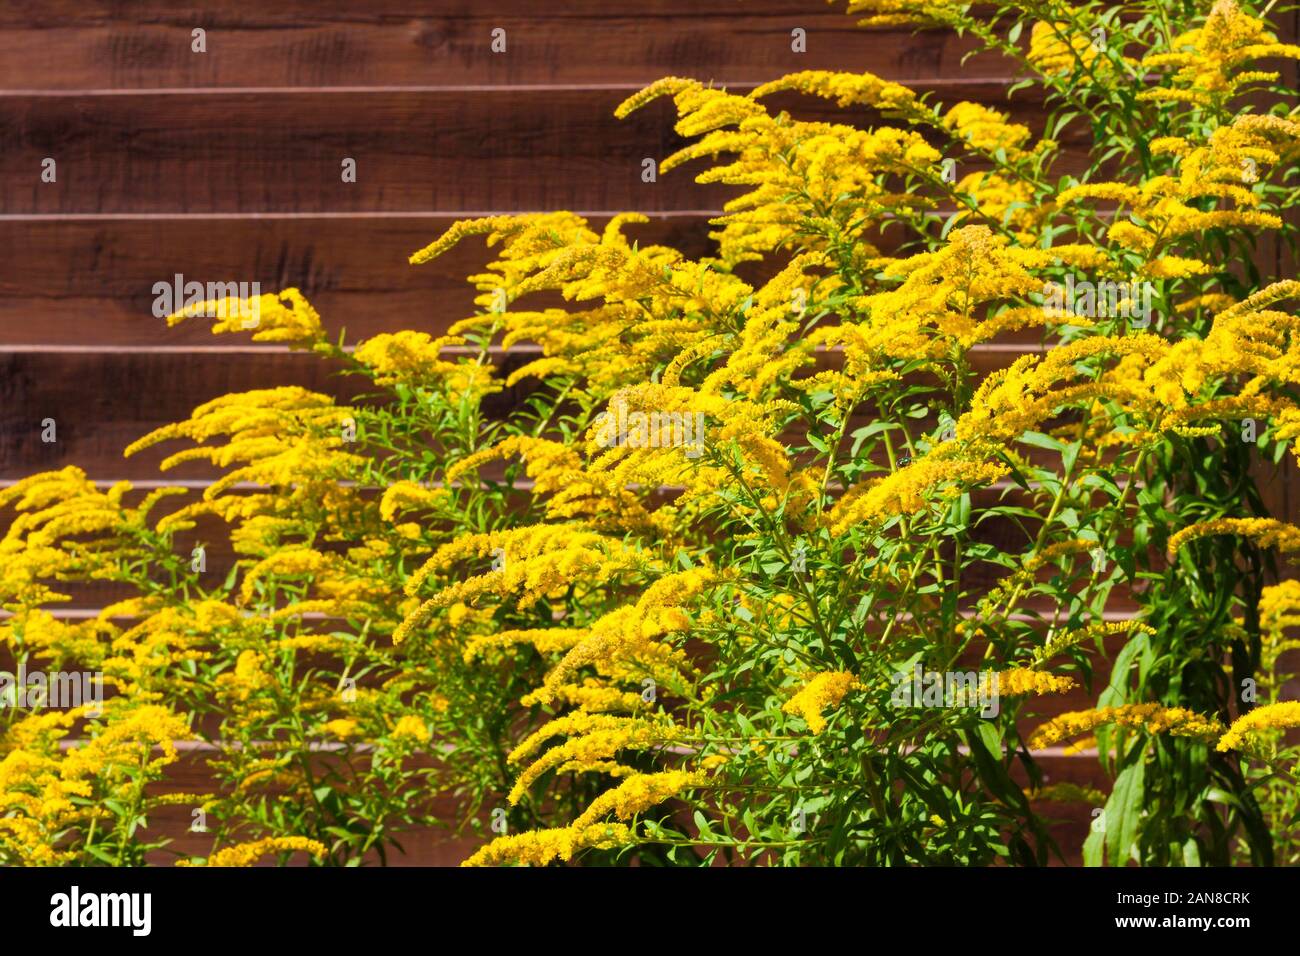 Blooming Canadian goldenrod (Solidago canadensis) on brown wooden fence background Stock Photo